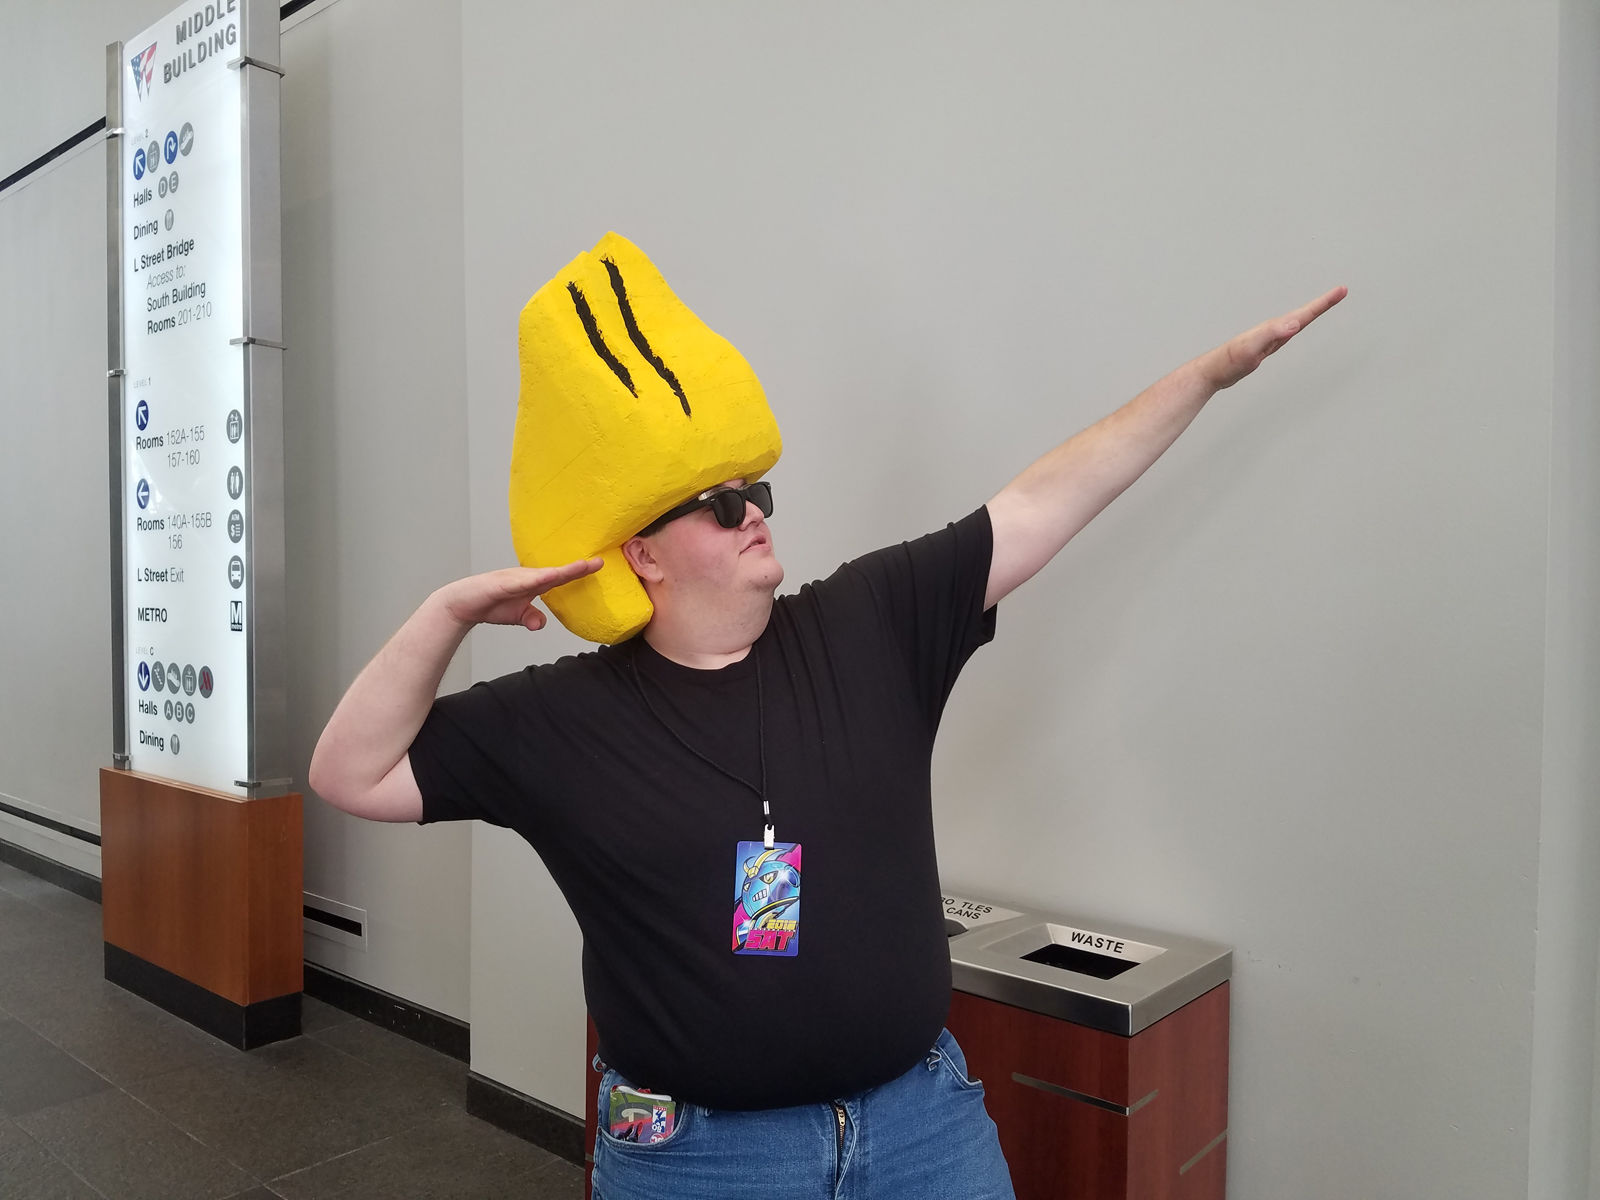 A man dressed as Johnny Bravo at AwesomeCon 2018. (WTOP/Will Vitka)